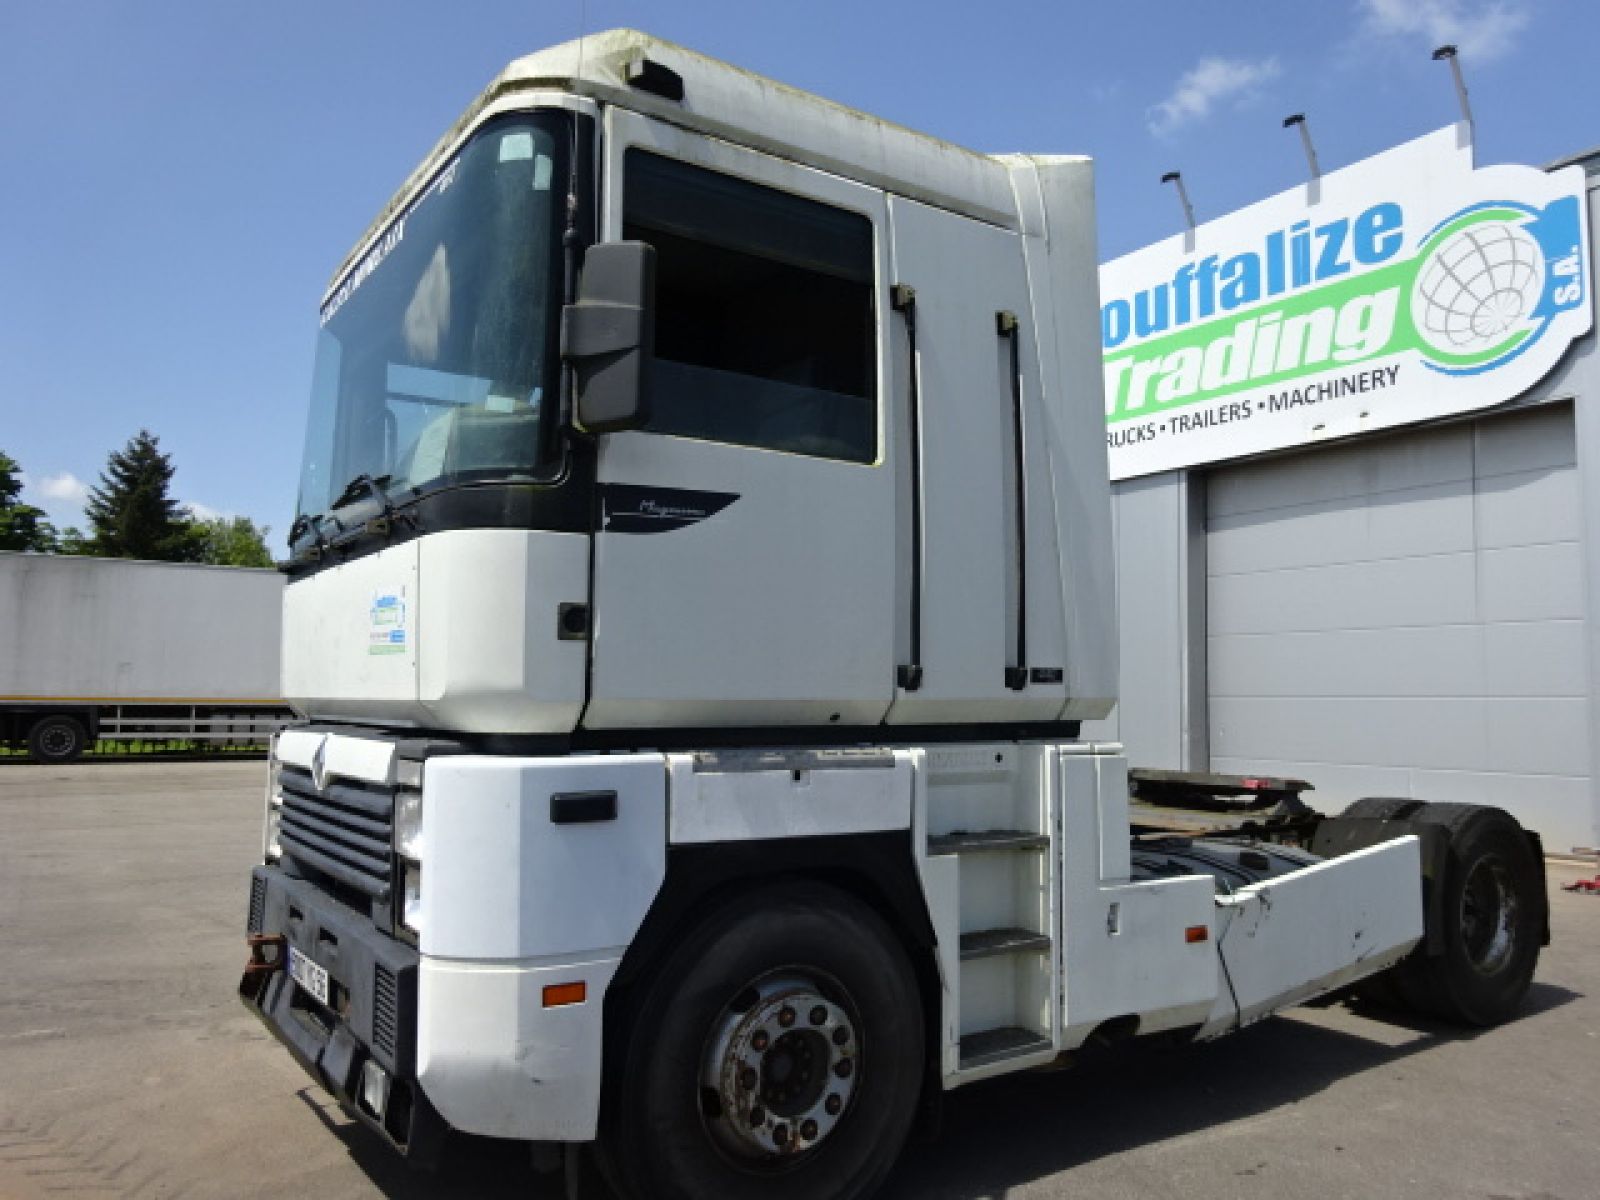 Unidades tractoras - RENAULT MAGNUM 440  Tracteur (Belgique - Europe) - Houffalize Trading s.a.